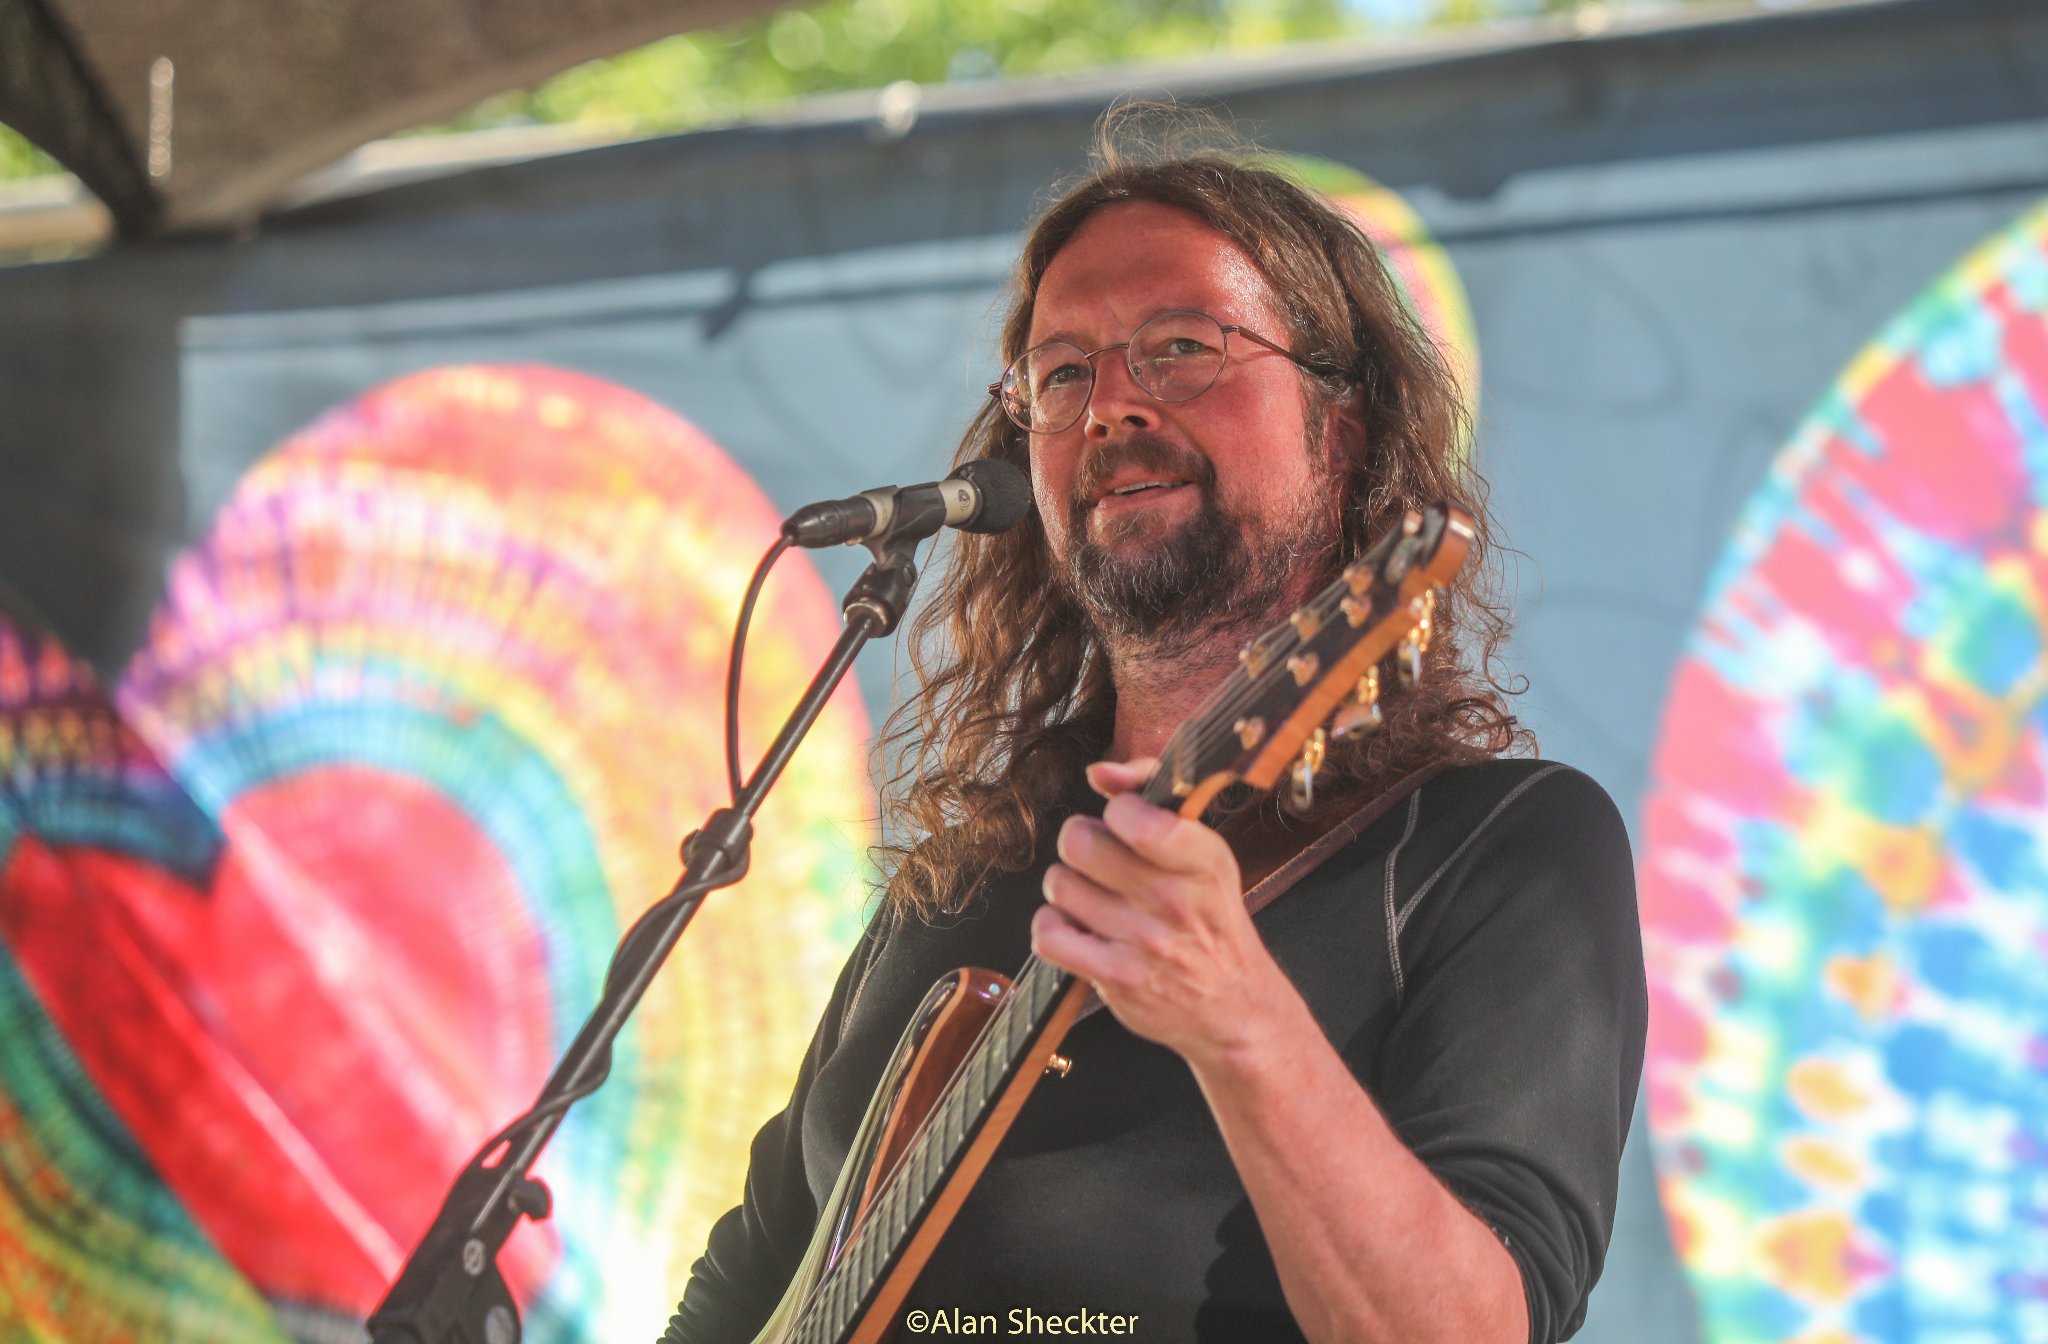 John Kadlecik performs a solo set before playing later with Melvin Seals & JGB on Sunday.